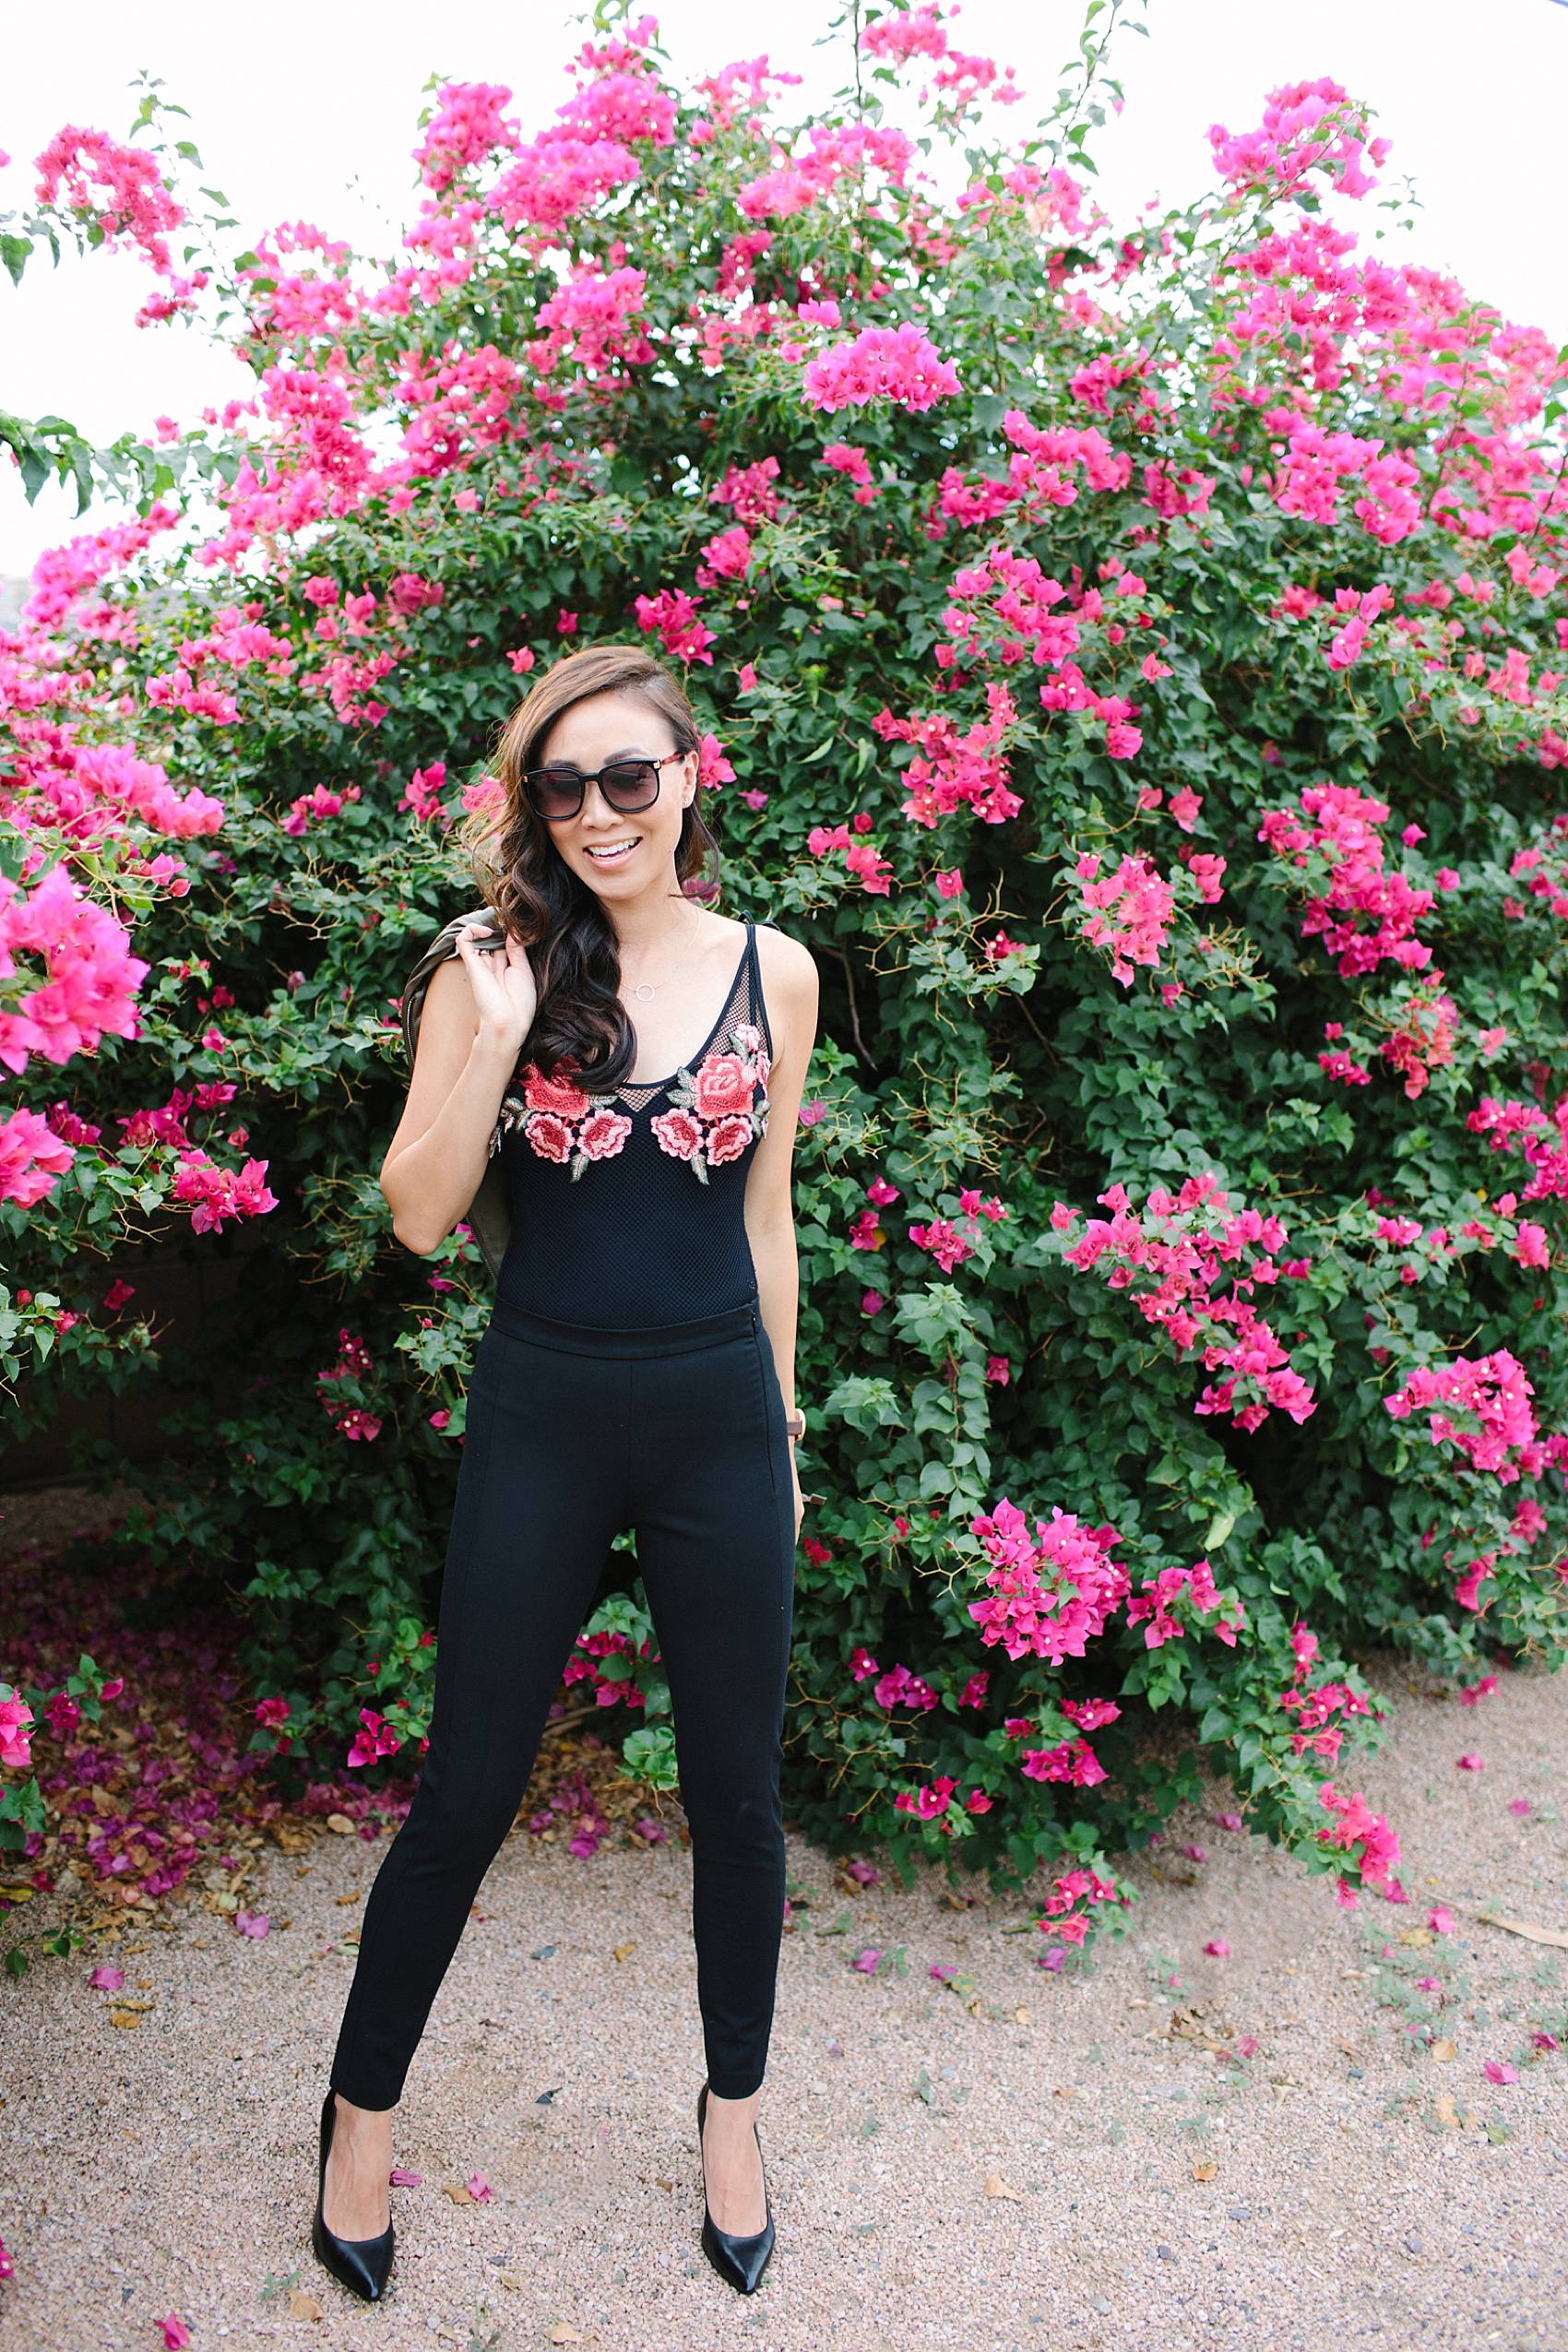 diana elizabeth lifestyle blogger in black devon-fit bi-stretch leggings and satin bomber jacket by banana republic standing in front of pink bougevvilla plants 